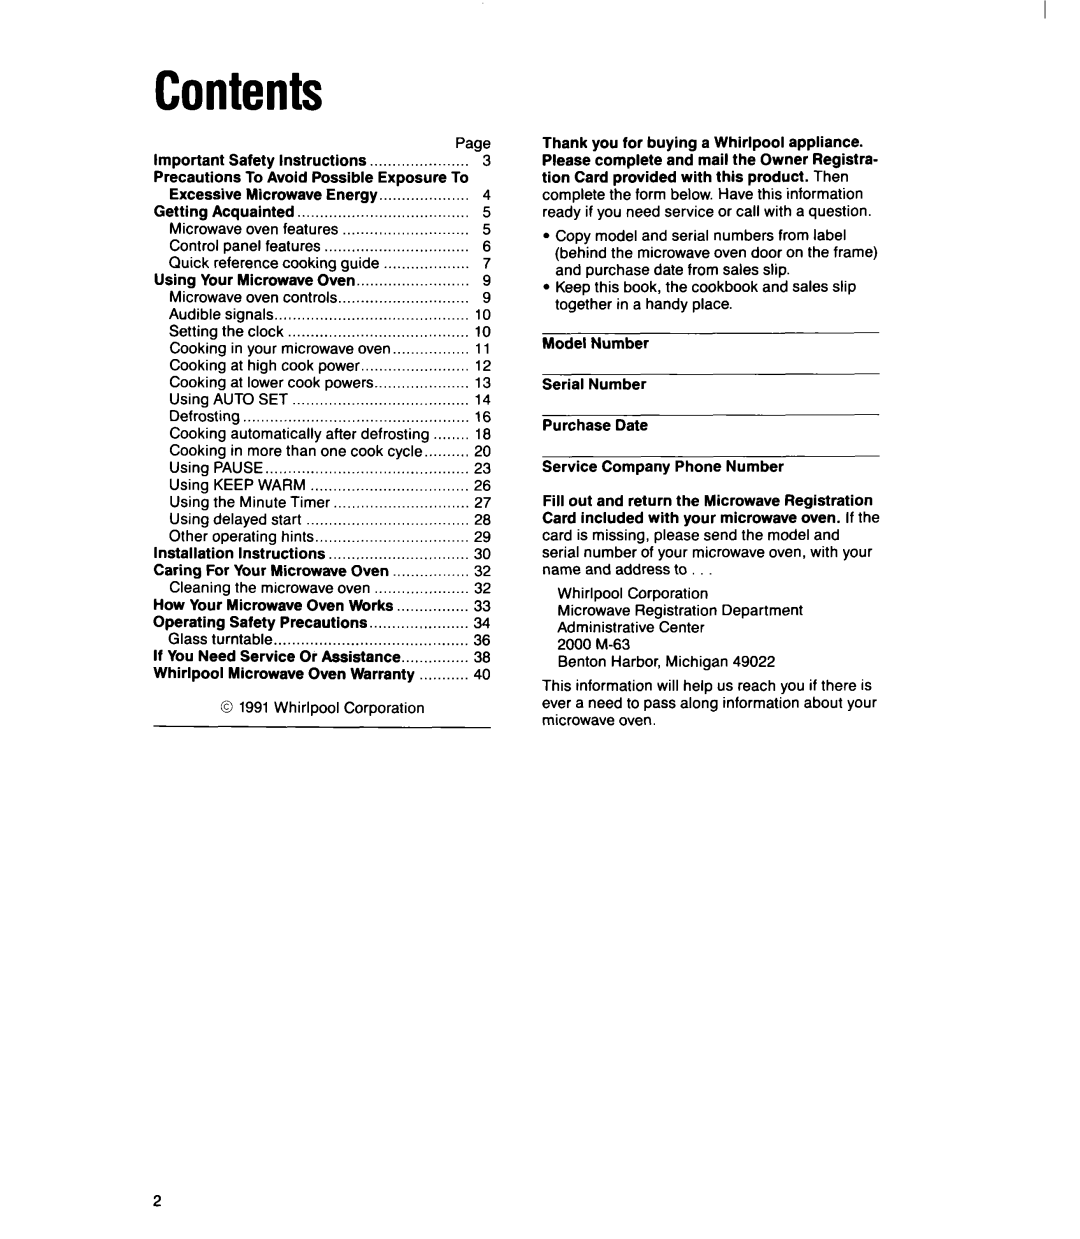 Whirlpool MT2100XY user manual Contents 